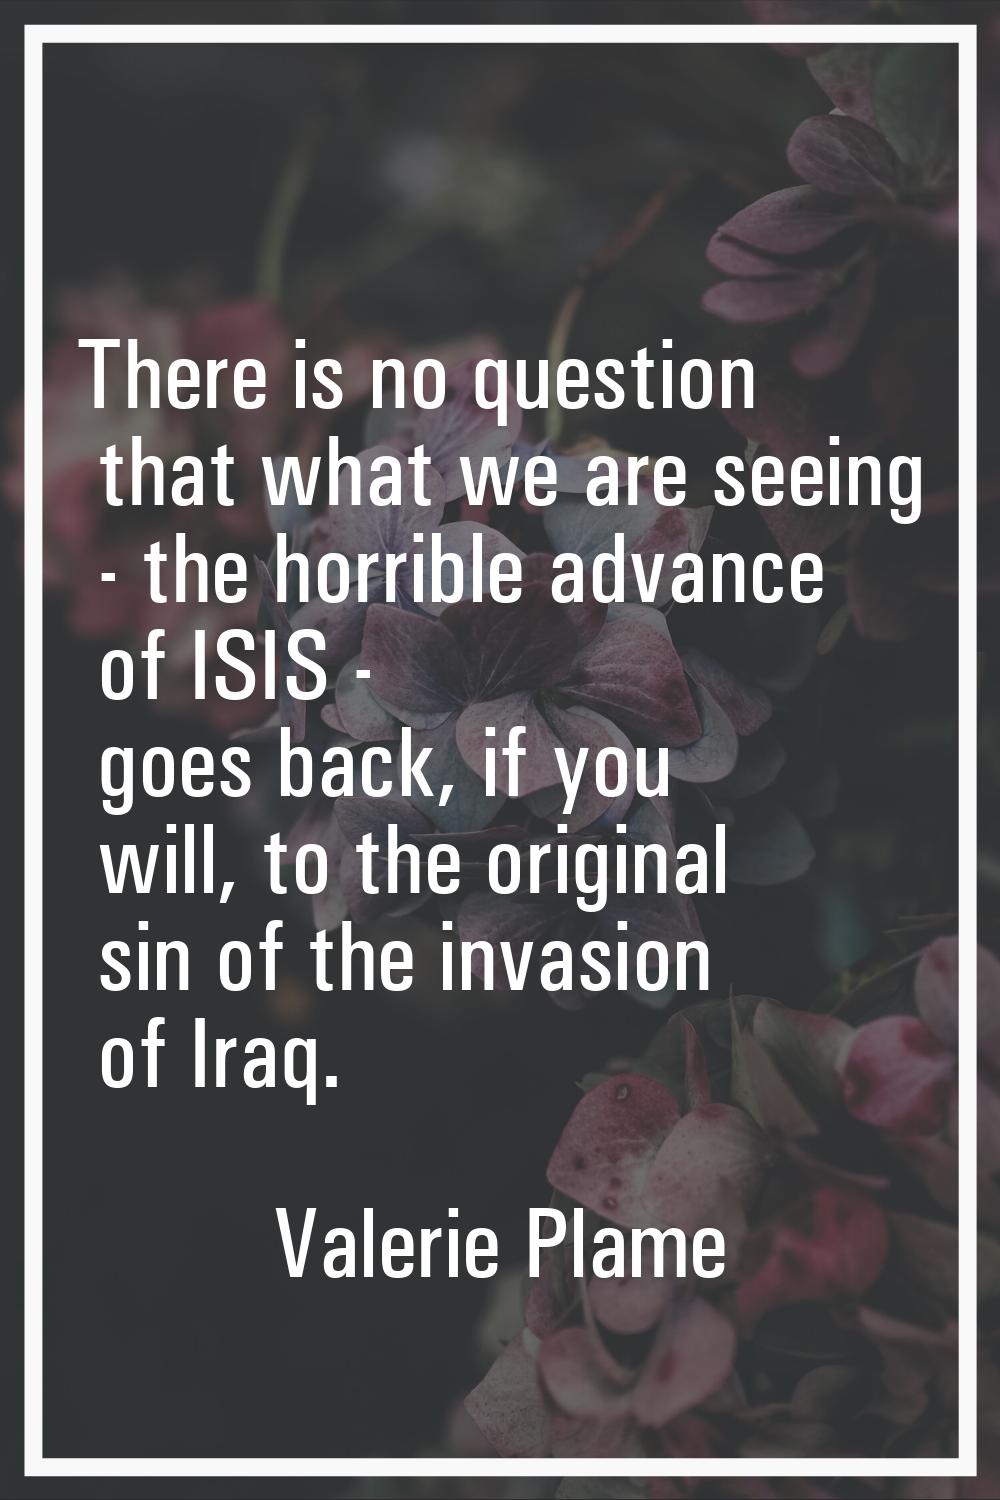 There is no question that what we are seeing - the horrible advance of ISIS - goes back, if you wil